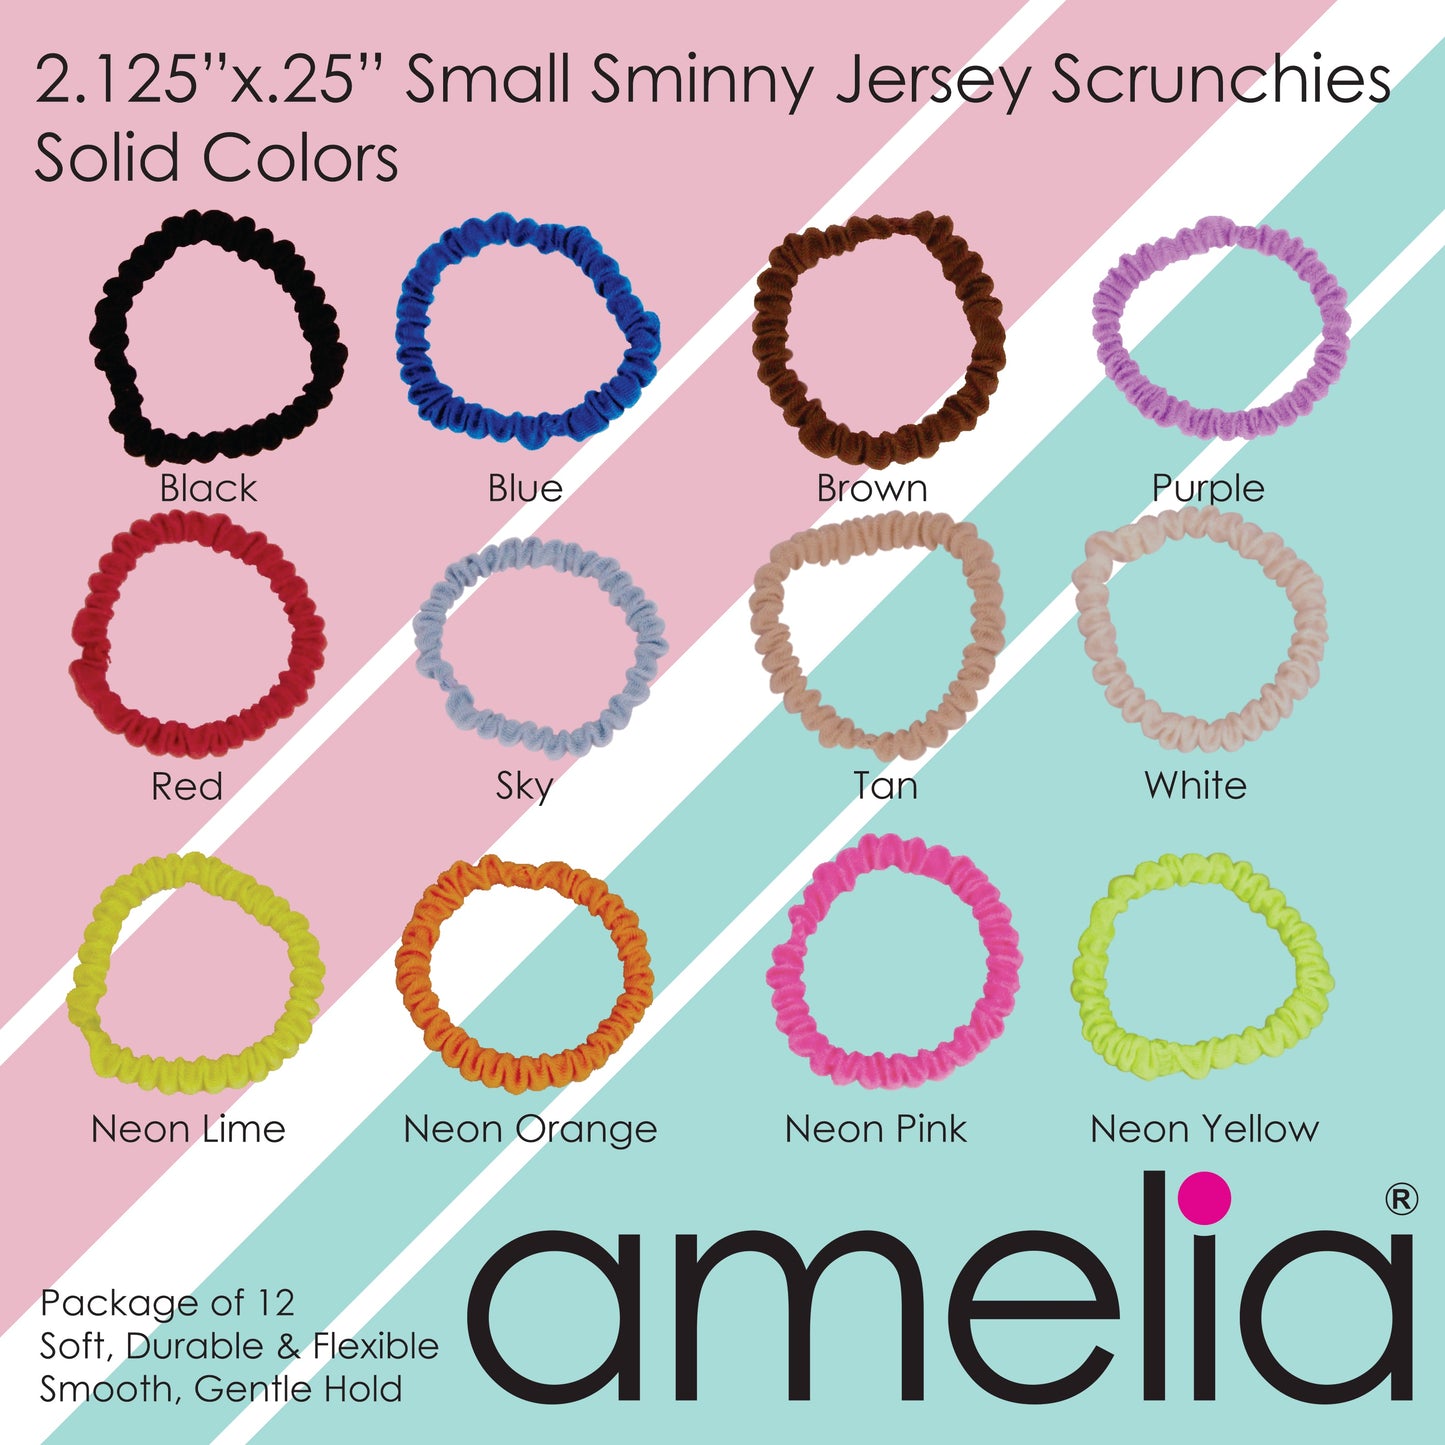 Amelia Beauty, Neon Lime Skinny Jersey Scrunchies, 2.125in Diameter, Gentle on Hair, Strong Hold, No Snag, No Dents or Creases. 12 Pack